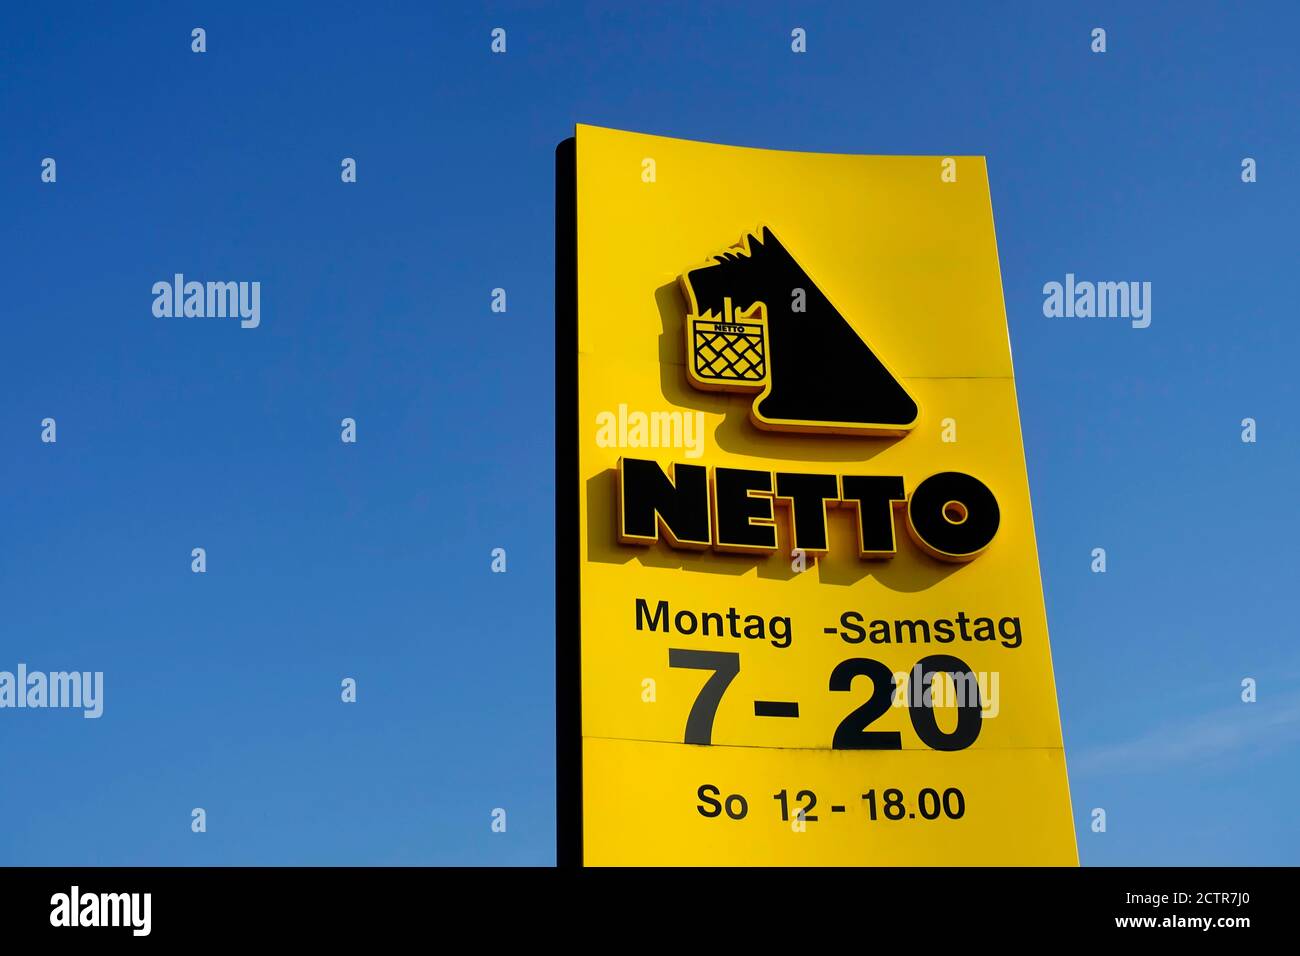 Netto, a Danish discount supermarket operating in Denmark, Germany, Poland Stock Photo